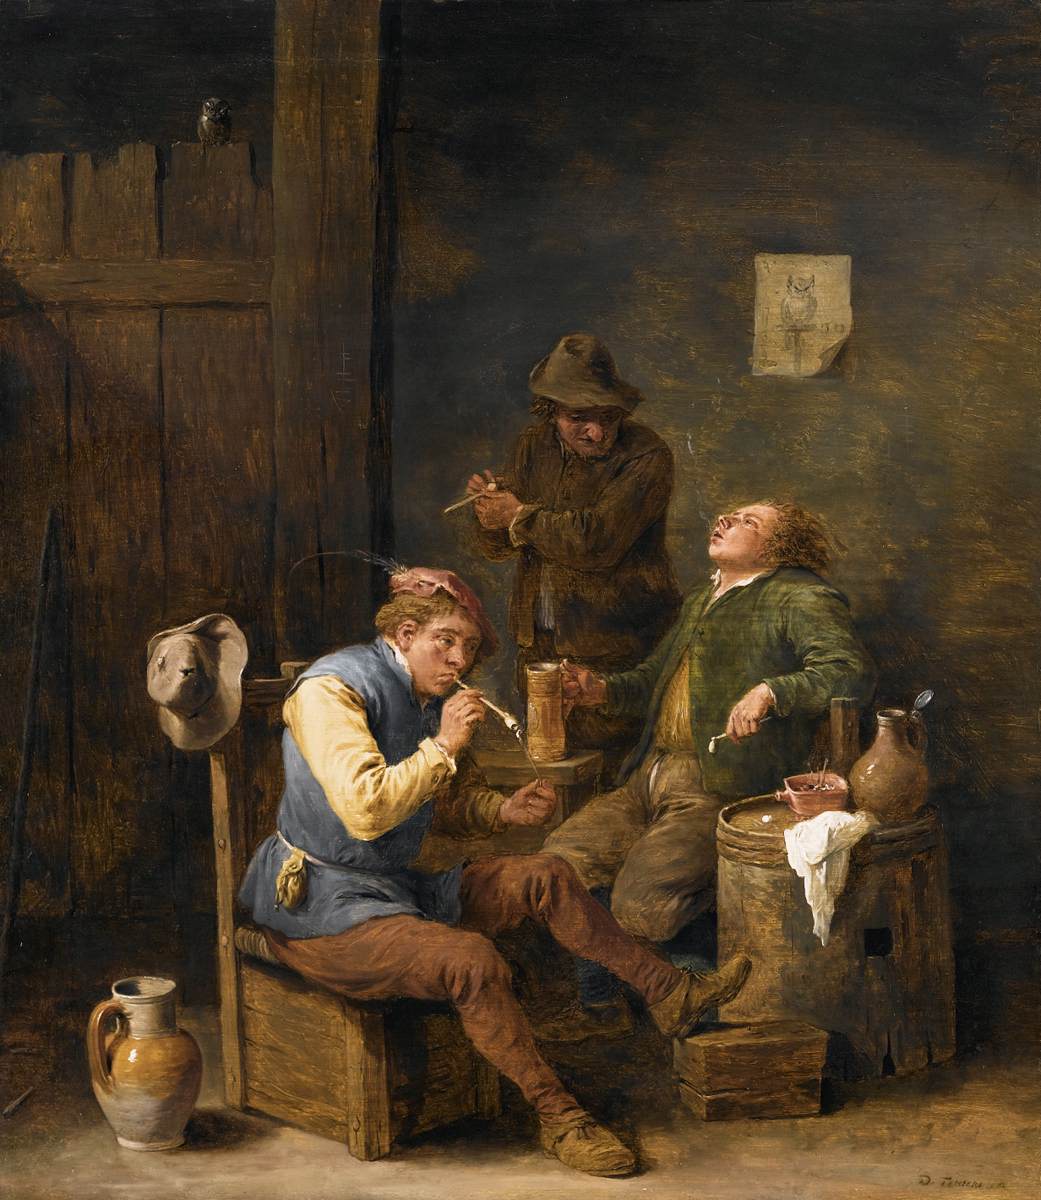 Three Smokers and Drinkers in a Tavern Interior